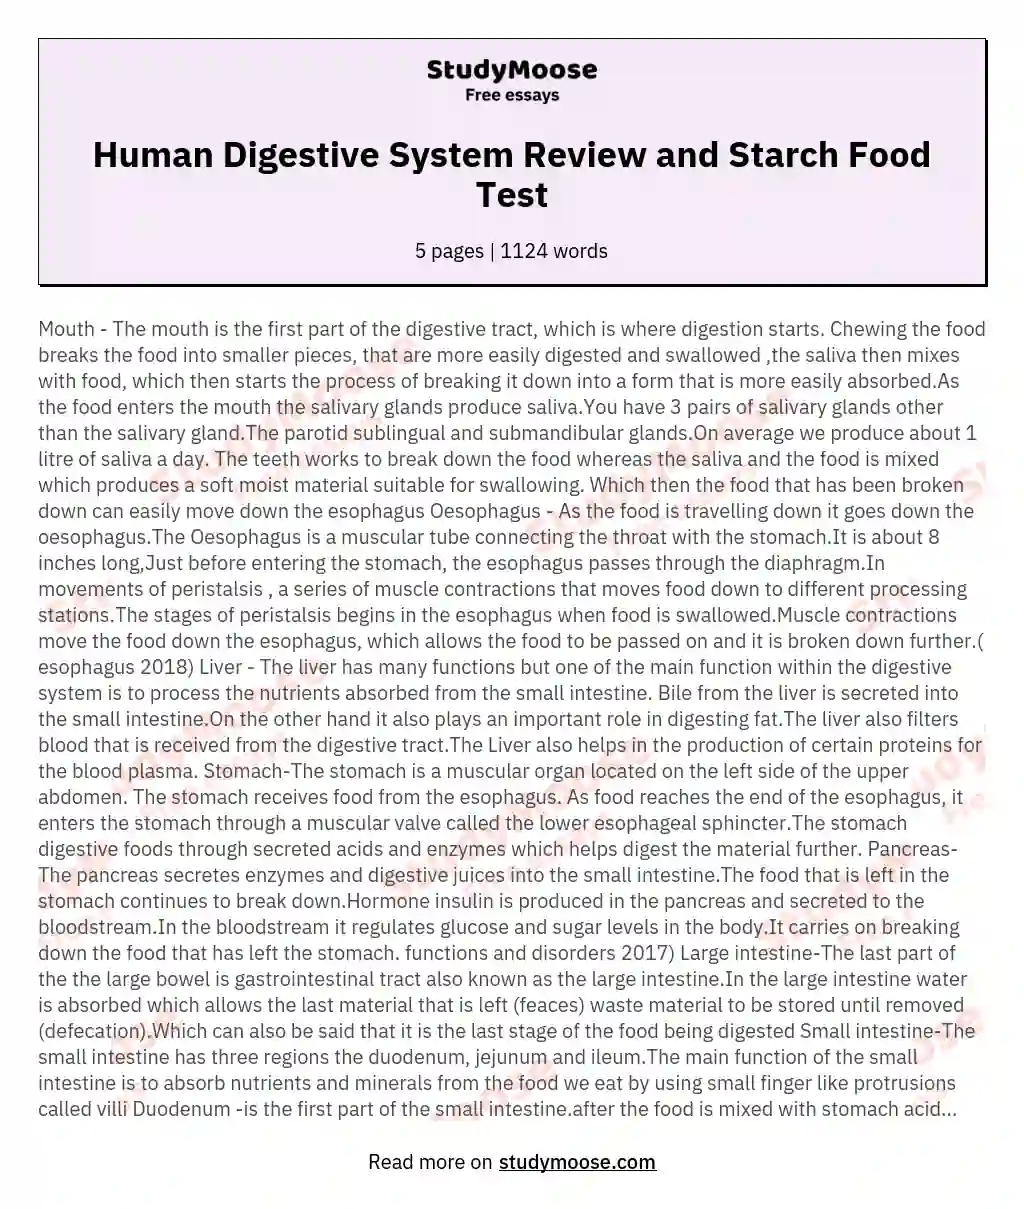 Human Digestive System Review and Starch Food Test